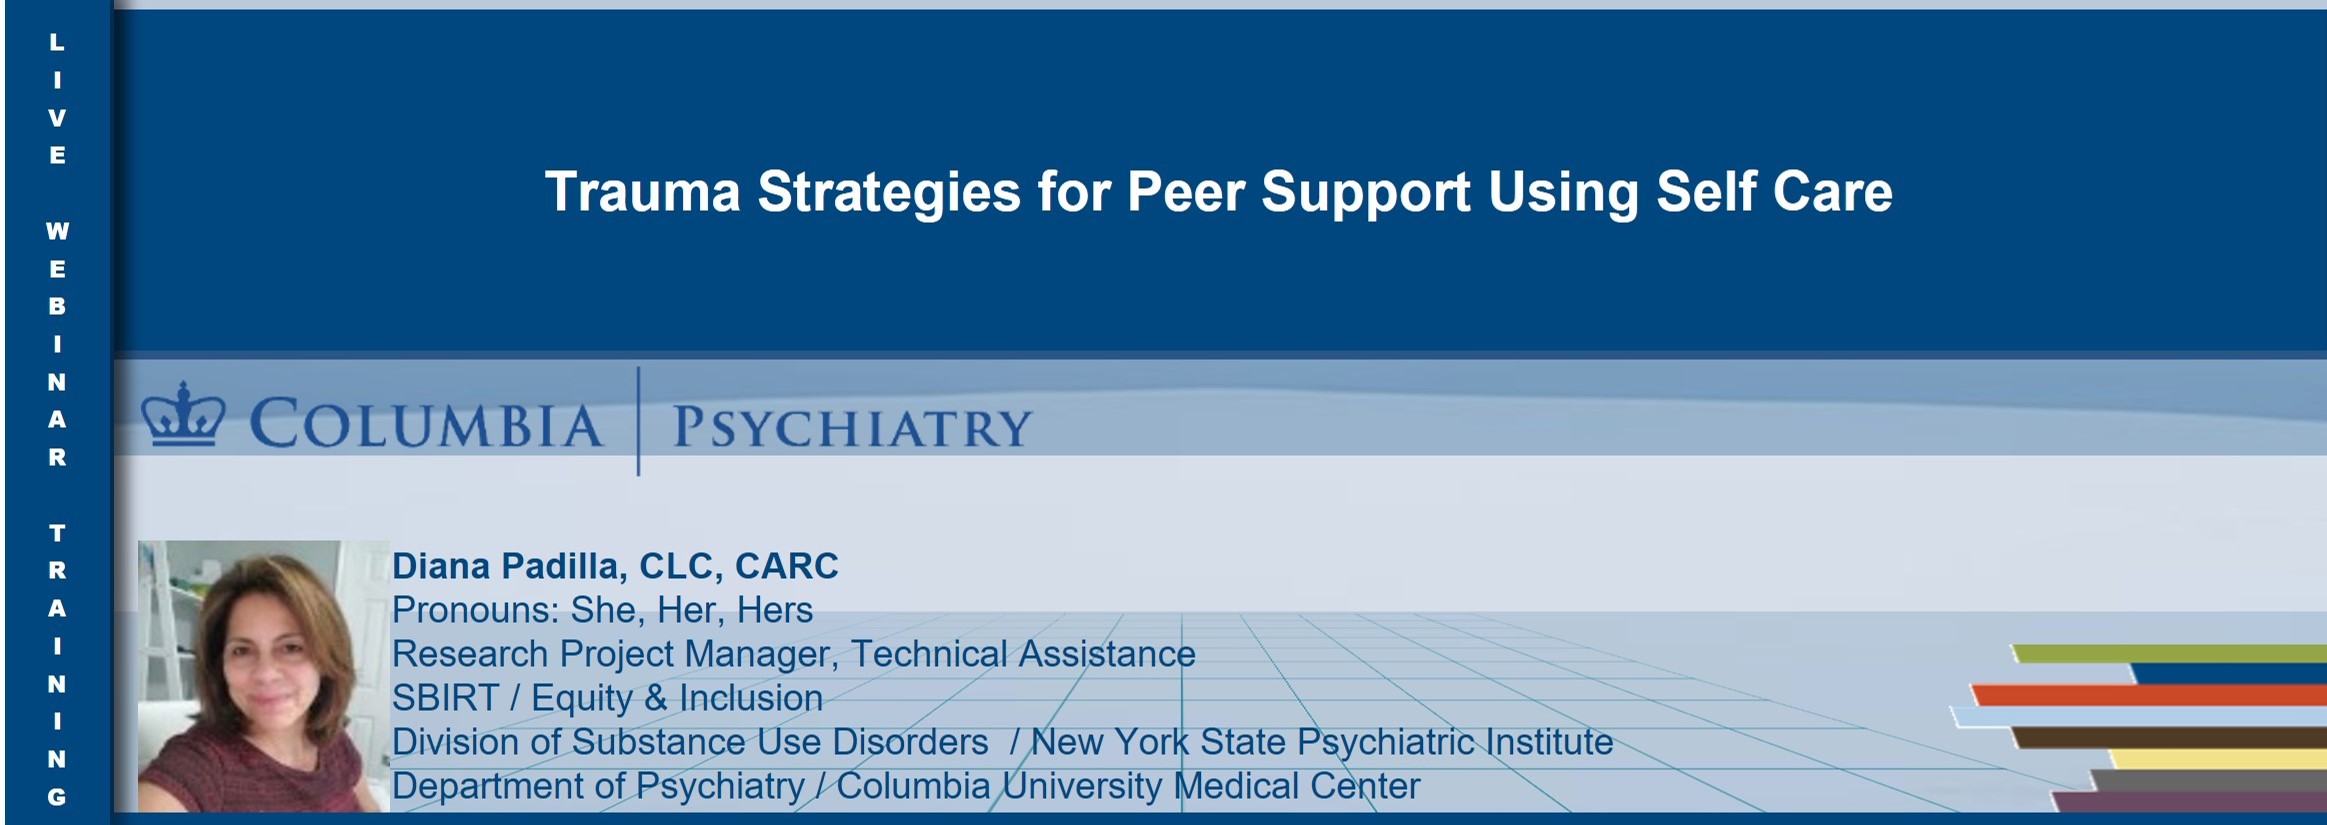 Trauma Strategies for Peer Support Using Self Care